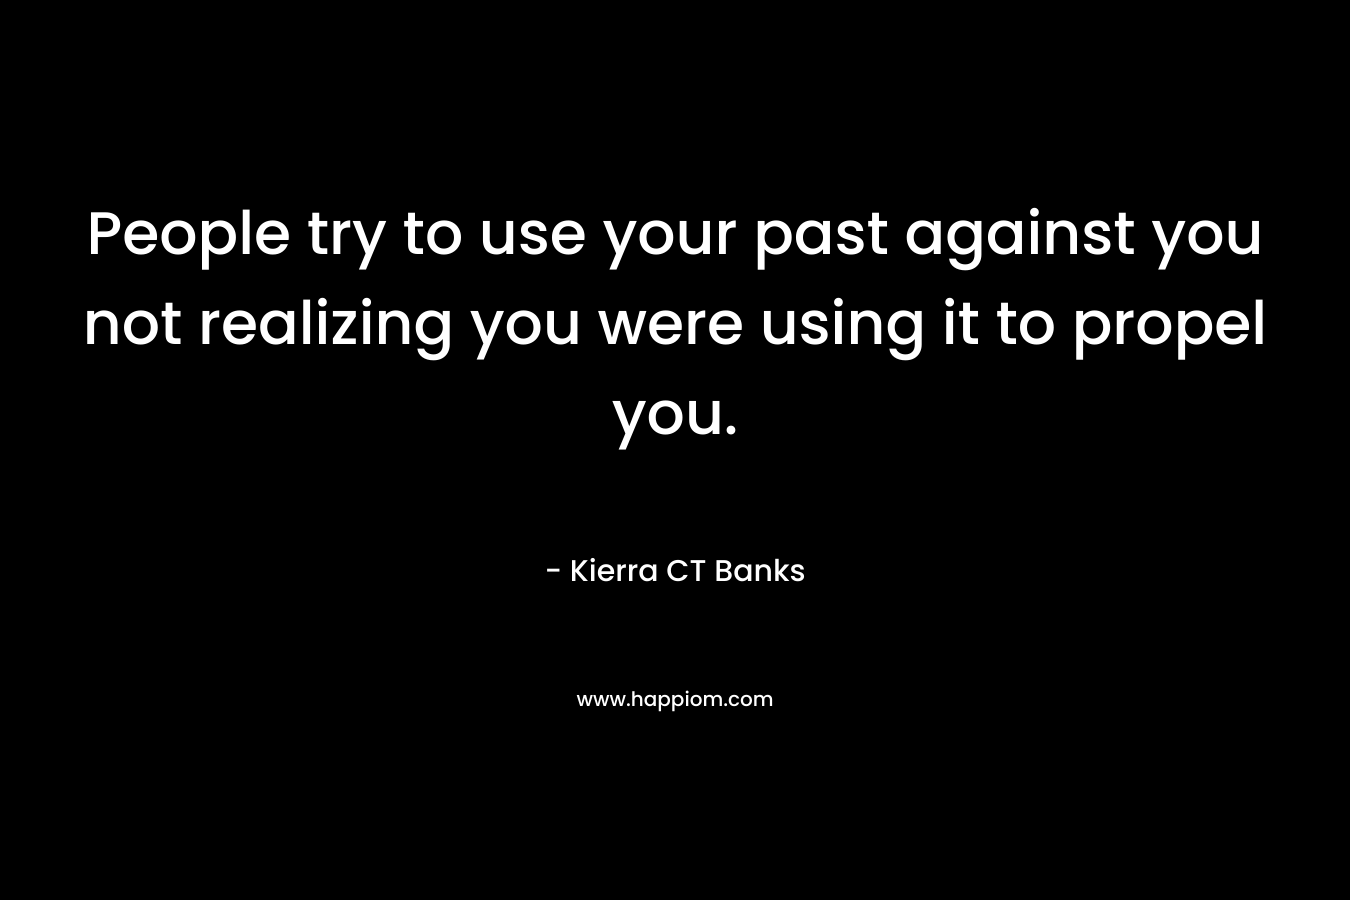 People try to use your past against you not realizing you were using it to propel you. – Kierra CT Banks